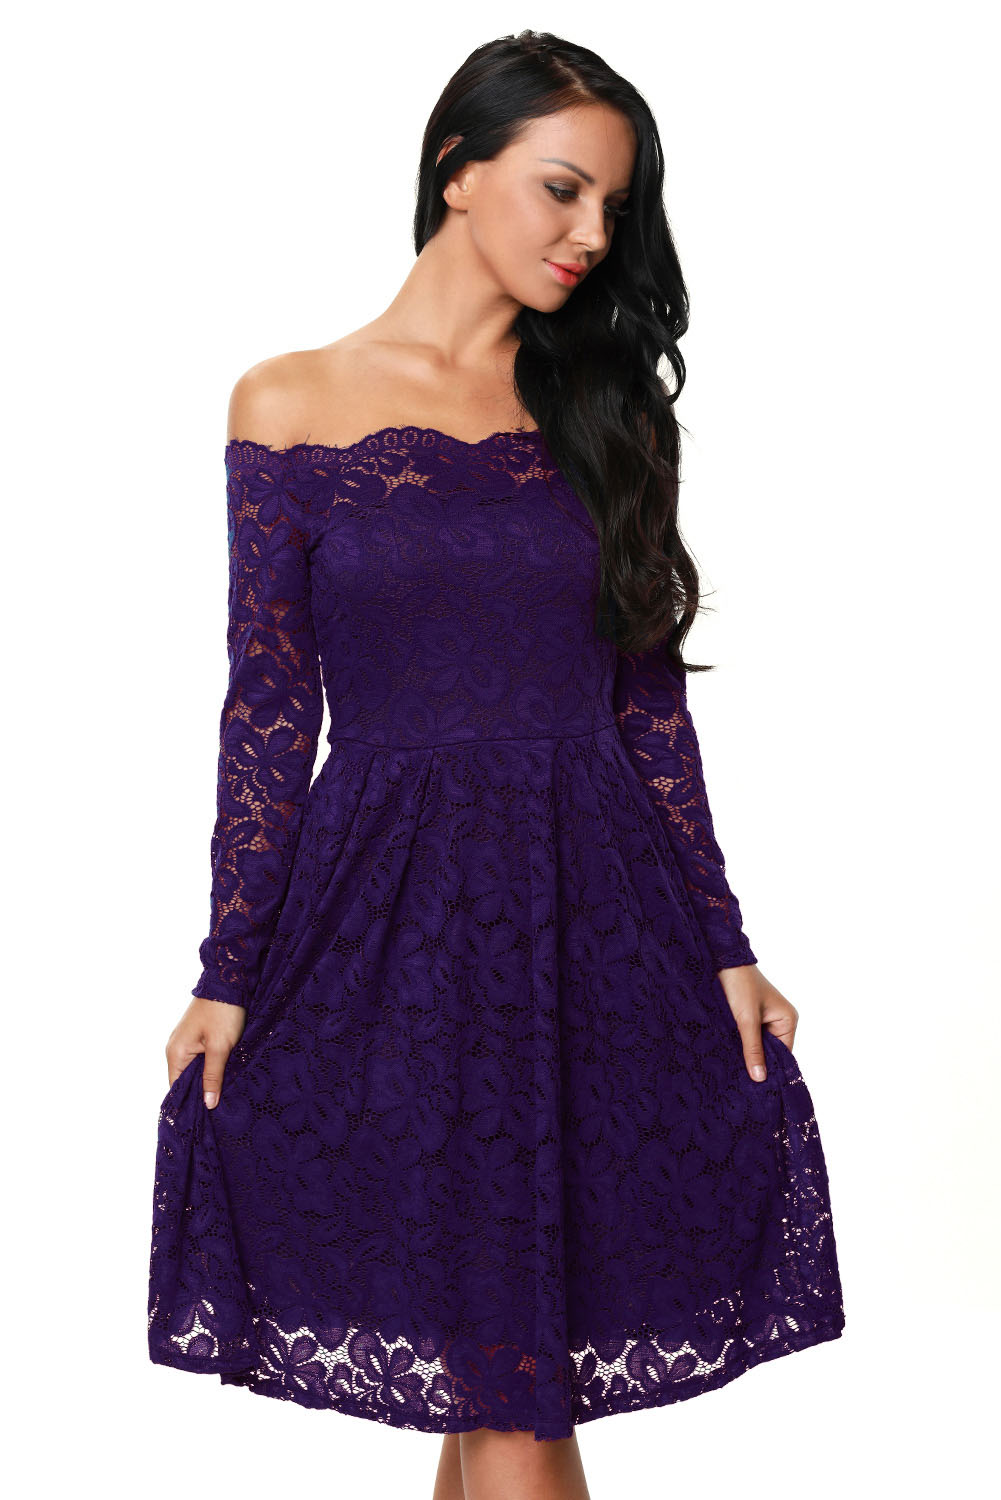 Purple Long Sleeve Floral Lace Boat Neck Cocktail Swing Dress ...